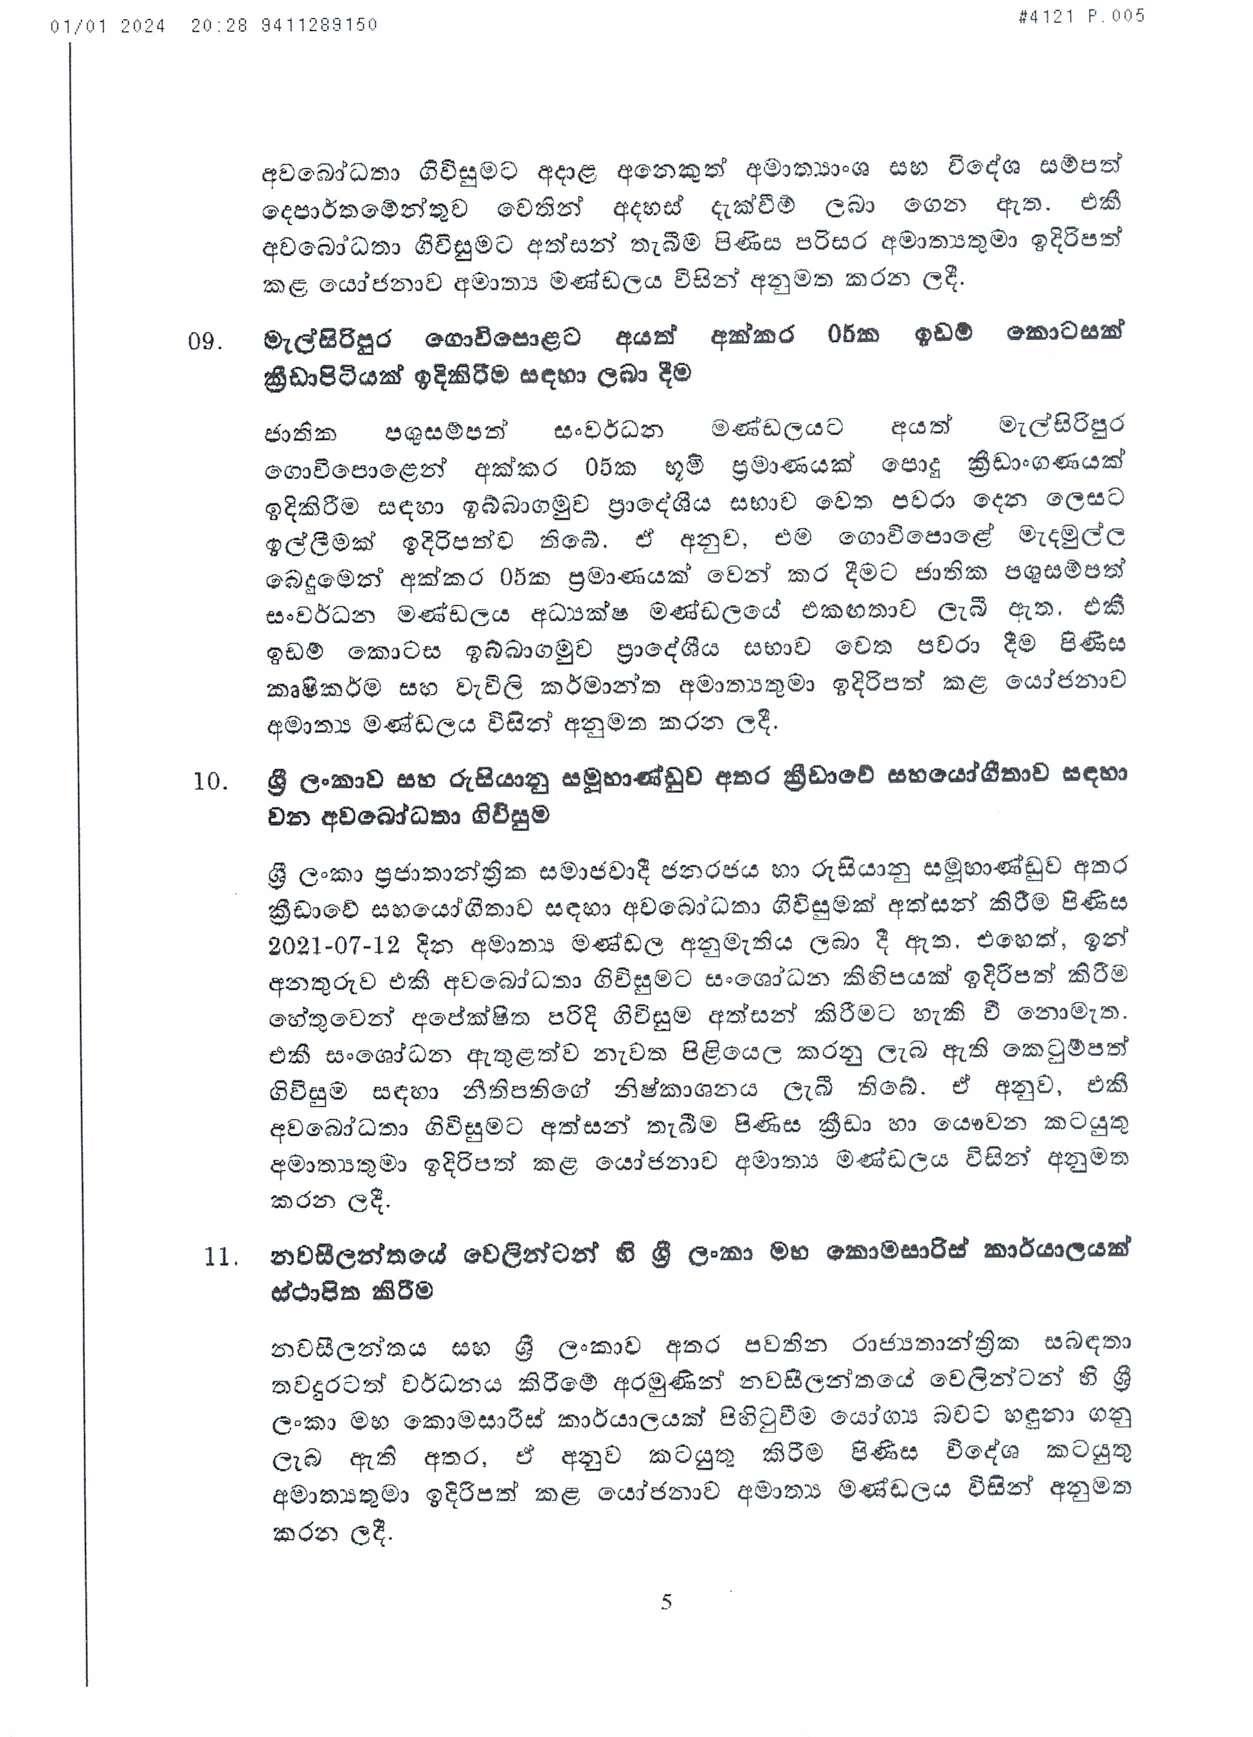 Cabinet Decision on 01.01.2024 page 005